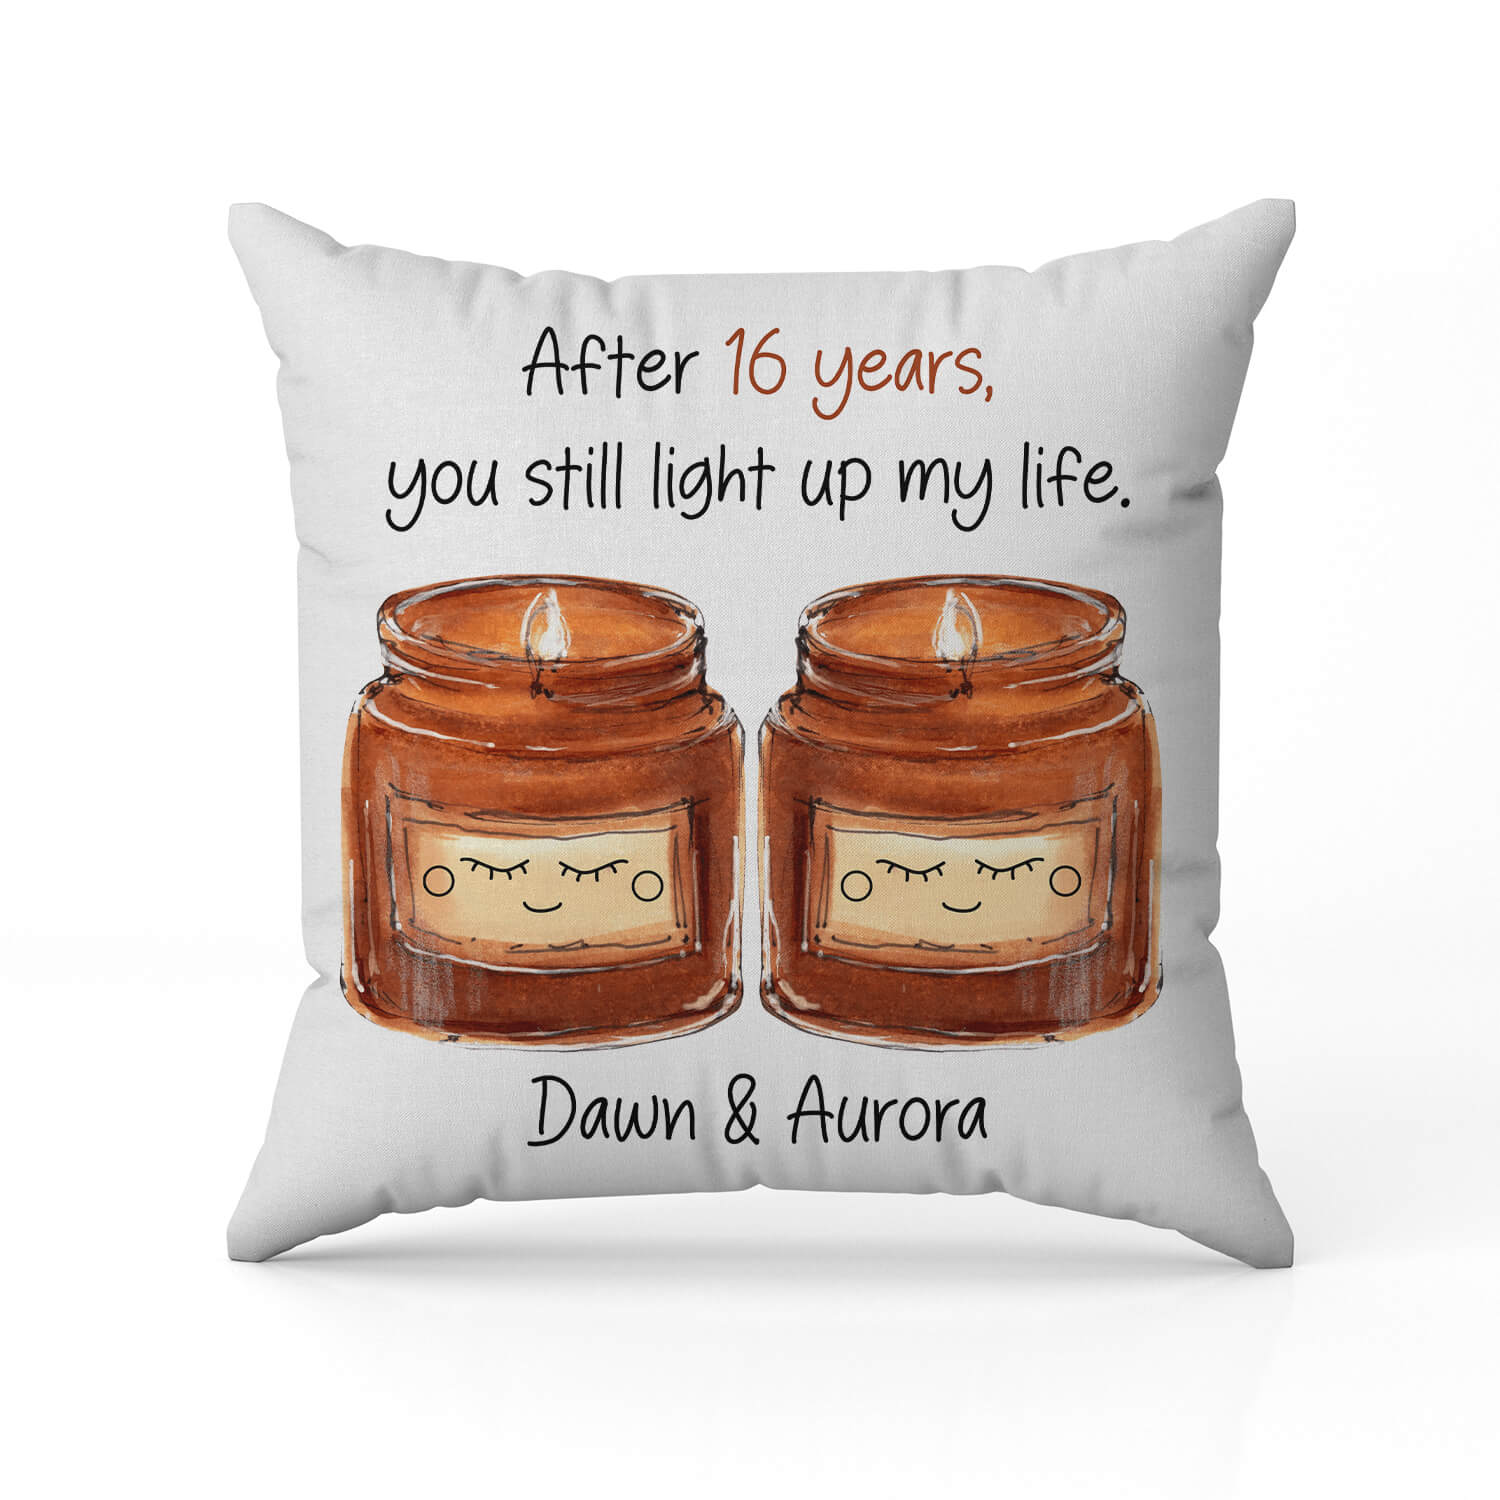 You Still Light Up My Life - Personalized 16 Year Anniversary gift For Husband or Wife - Custom Pillow - MyMindfulGifts